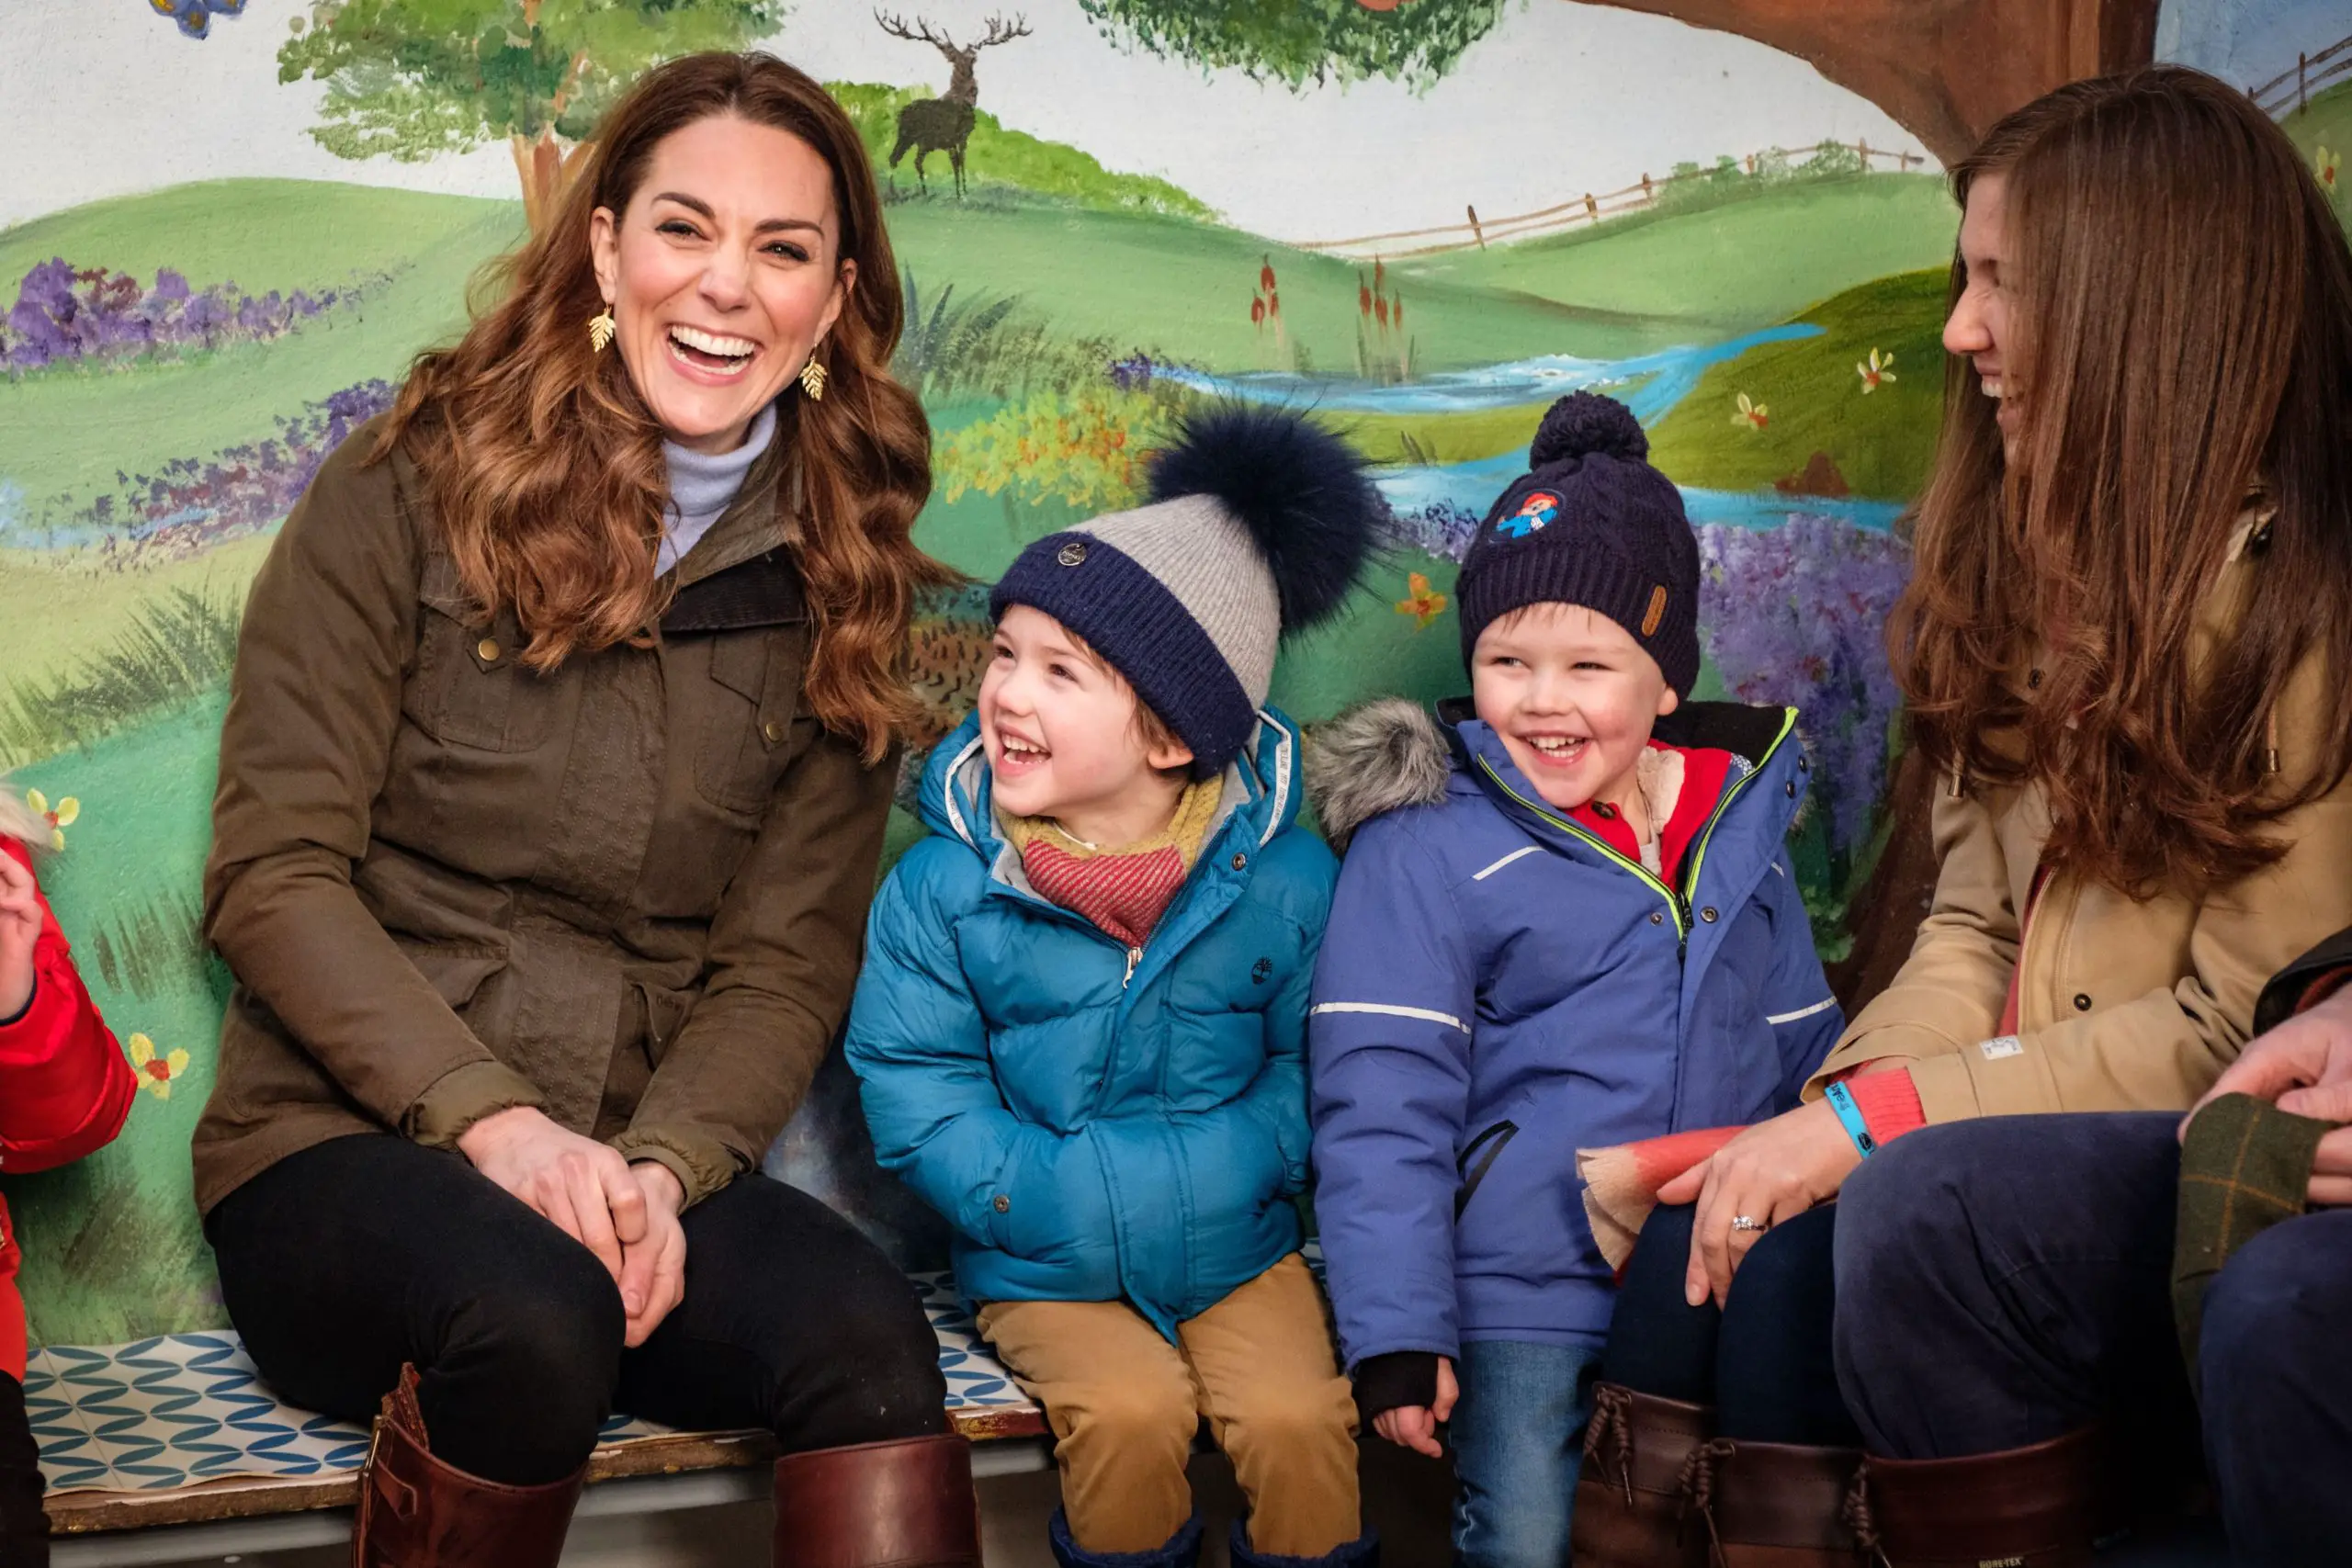 The Duchess of Cambridge heard their thoughts on the most important factors that ensure children become happy adults and the role of parents and society in ensuring children have the best possible start in life.